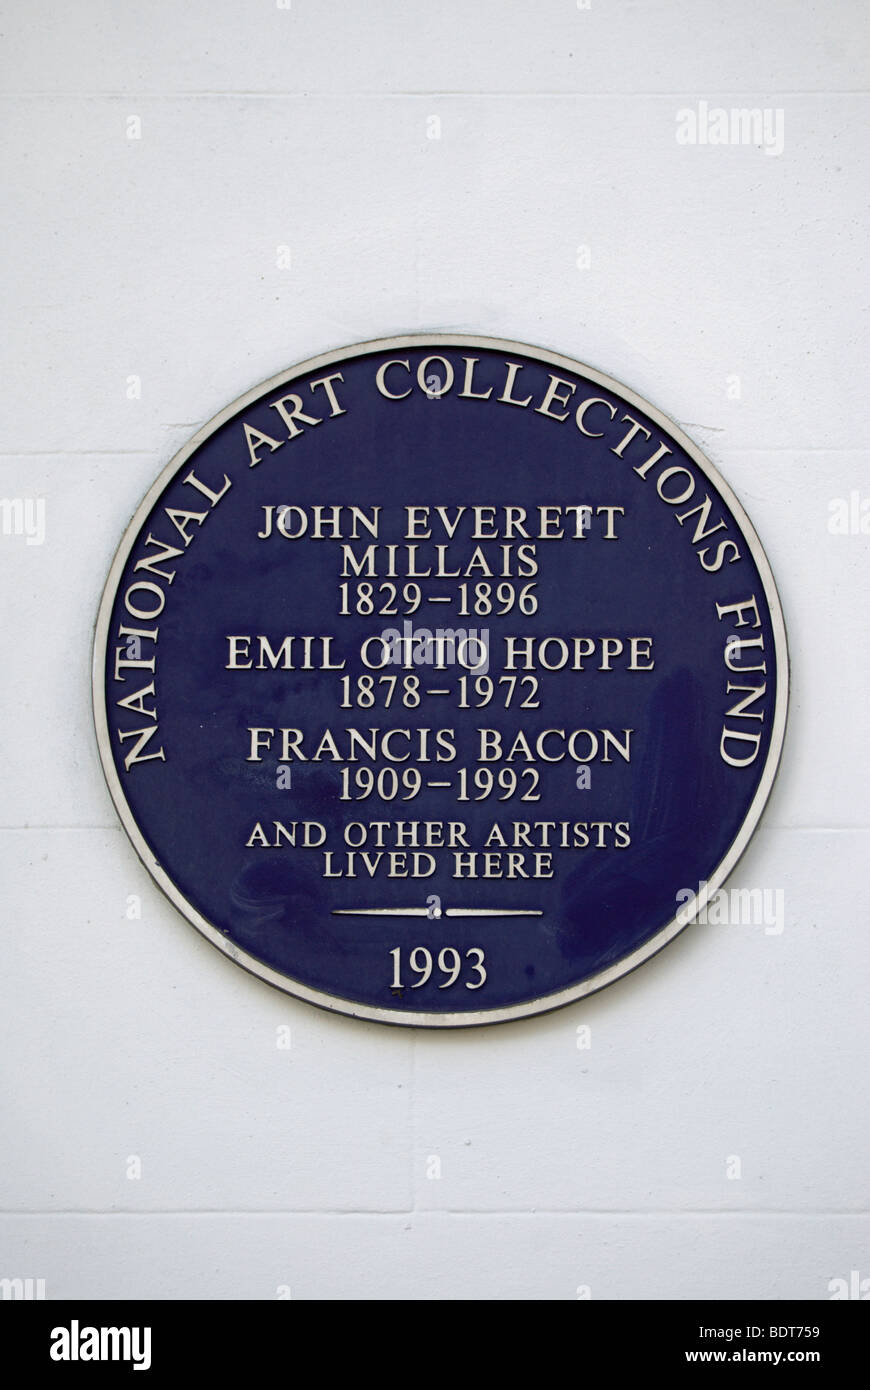 national art collections fund blue plaque marking a building lived in by john everett millais, francis bacon and other artists Stock Photo